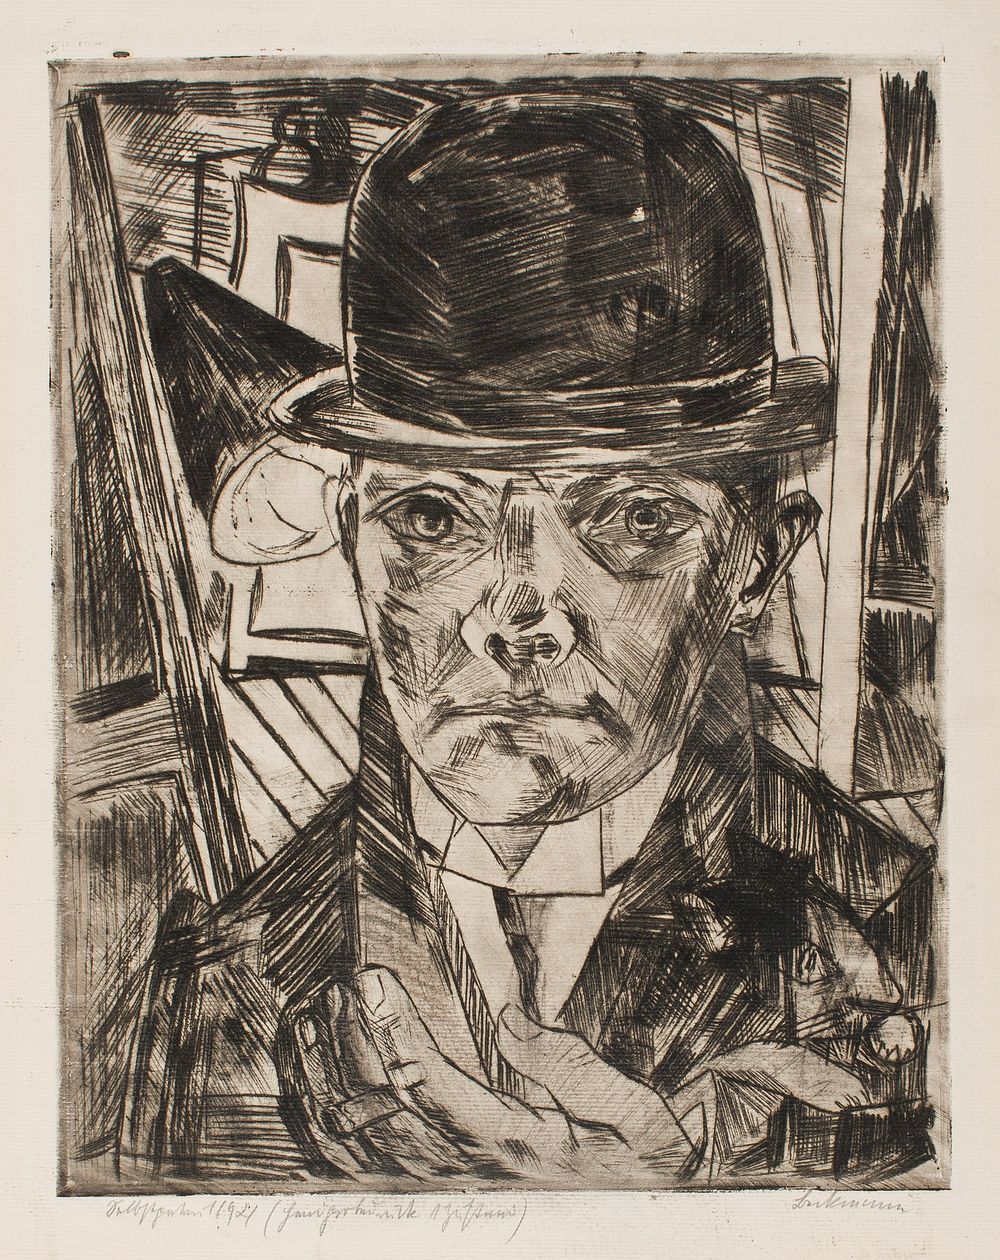 Self-Portrait in Bowler Hat by Max Beckmann